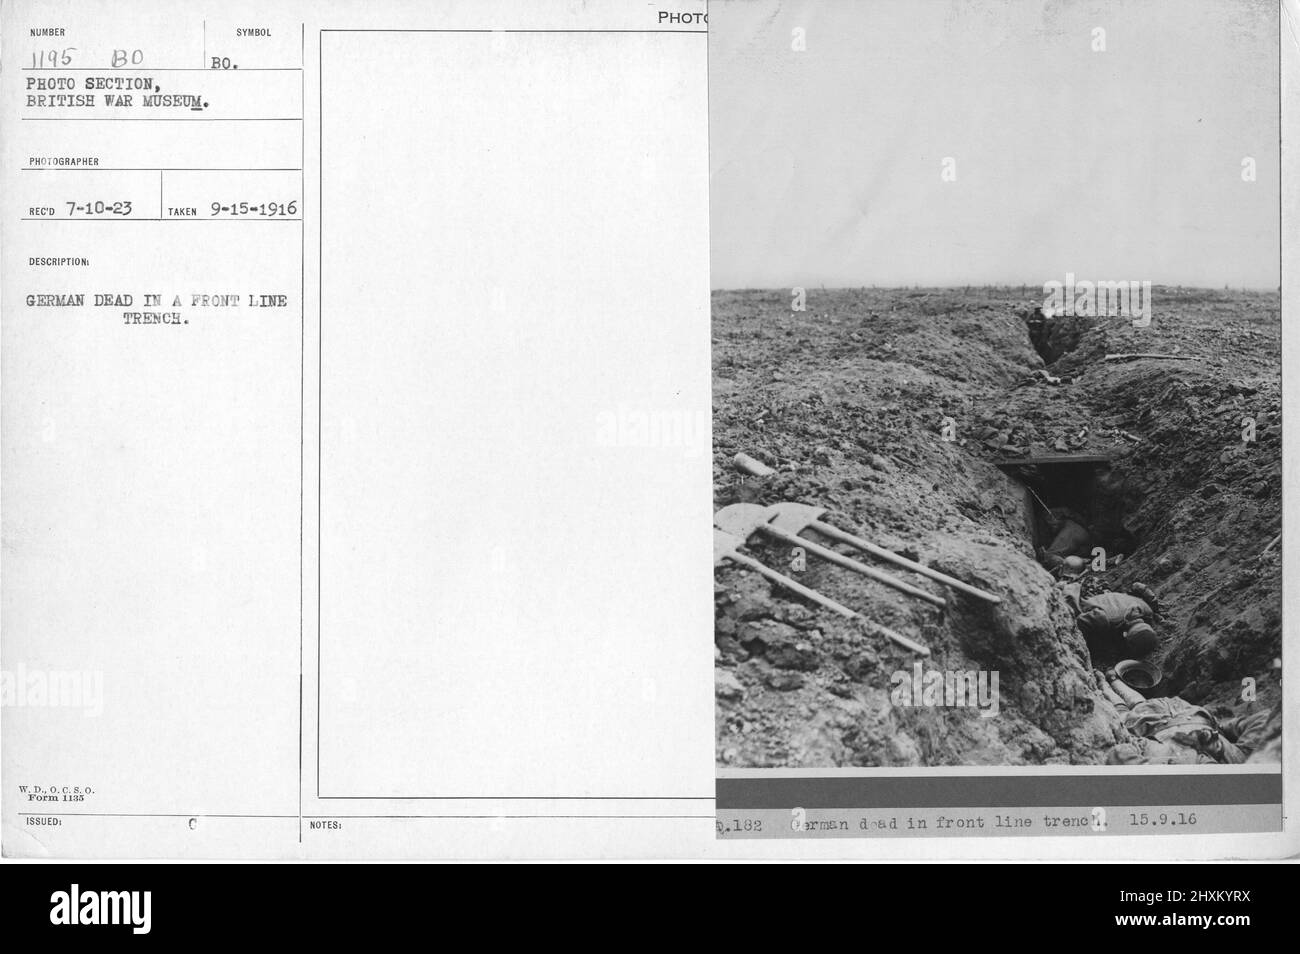 German dead in a front line trench. Collection of World War I ...